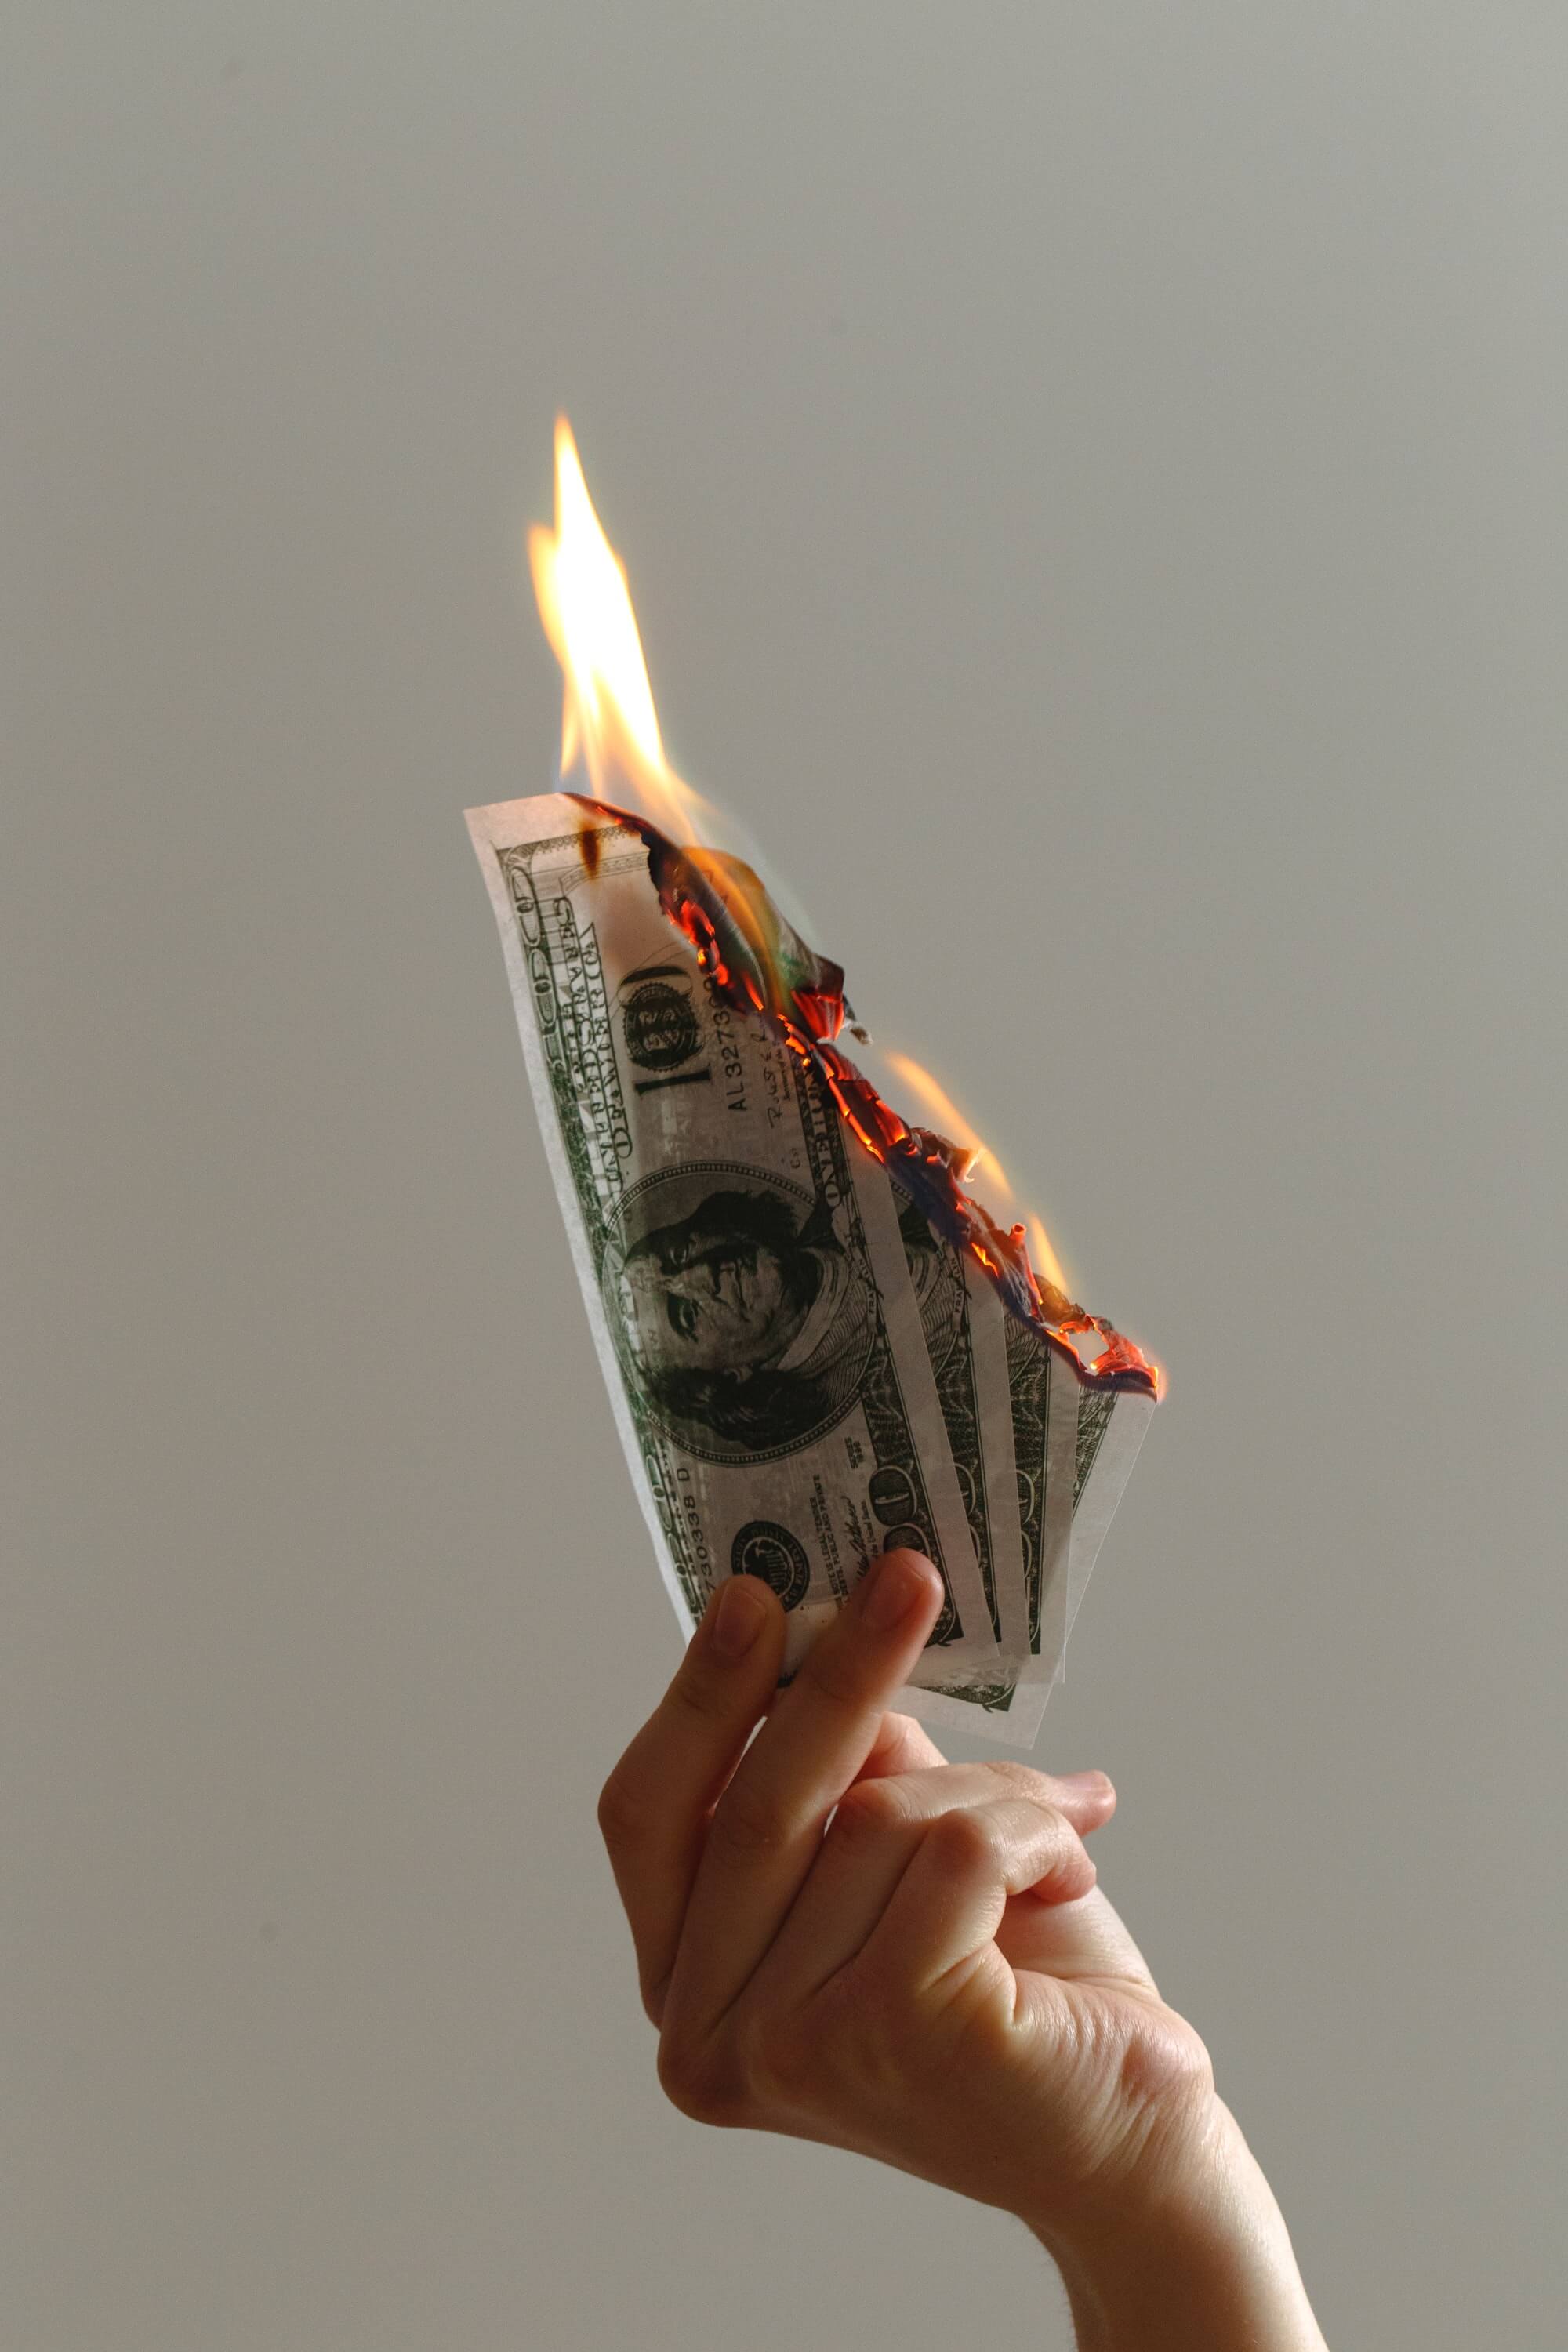 $235M in Ethereum Has Been Burned Since the London Fork